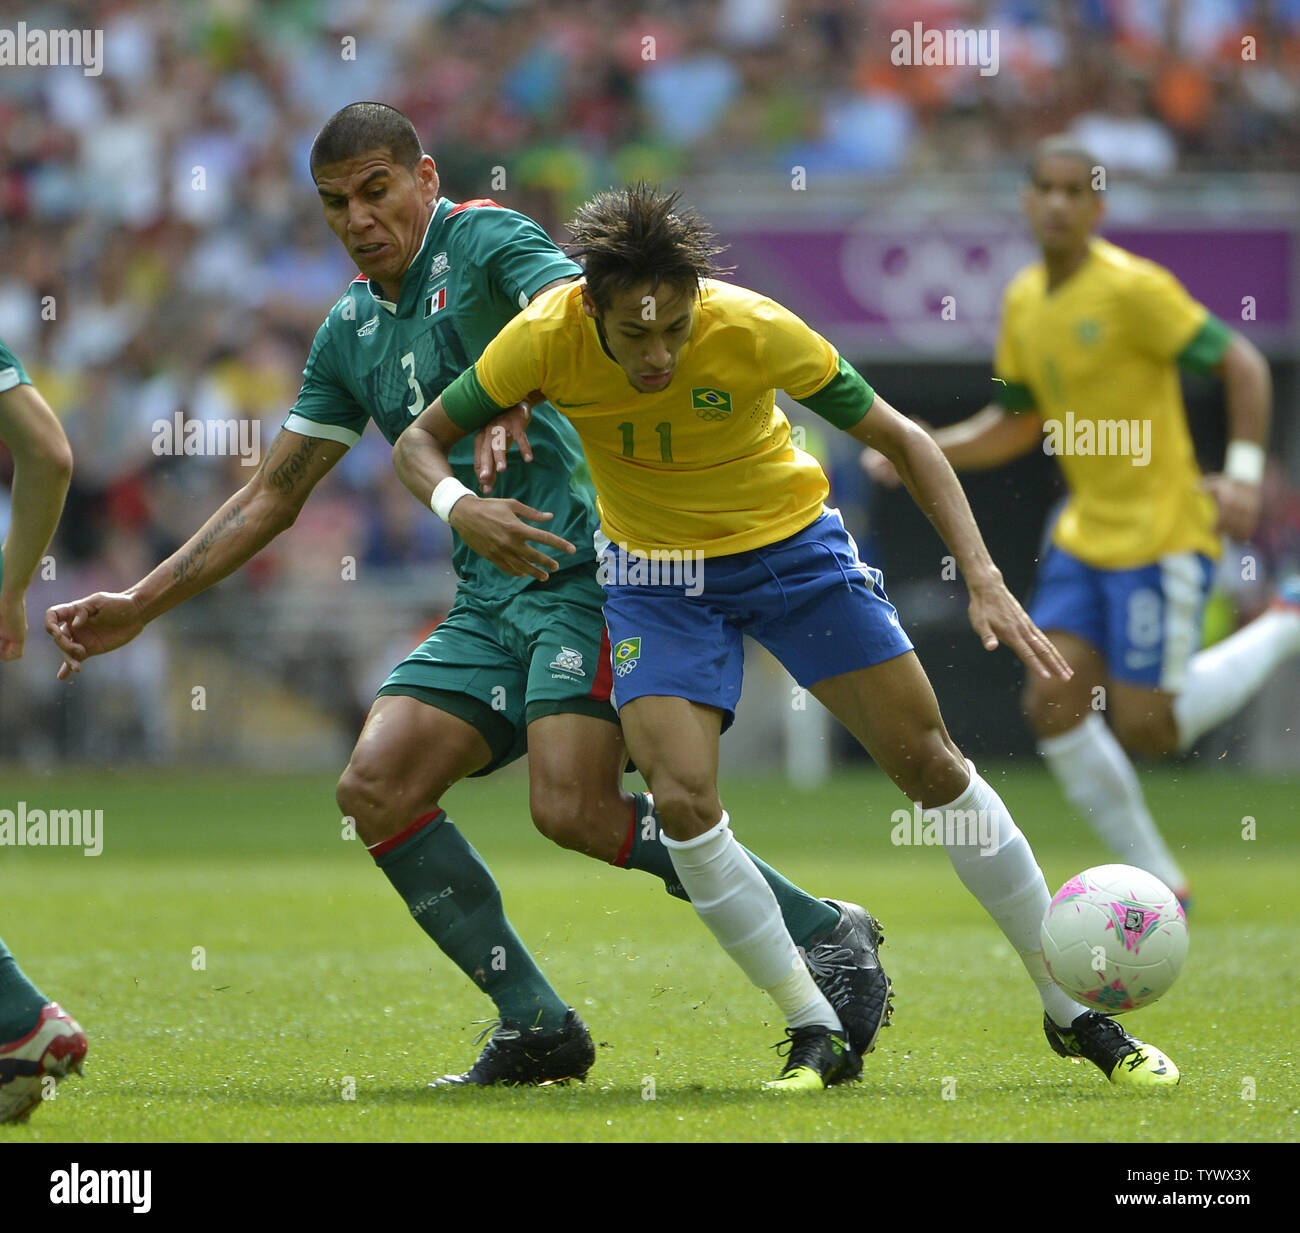 Defender Carlos Salcido of Mexico knocks forward Neymar of Brazil off the ball during the second half of the Gold Medal Football Match at the London 2012 Summer Olympics on August 11, 2012 at Wembley Stadium, London. Mexico defeated Brazil 2-1 to win the Gold Medal.      UPI/Brian Kersey Stock Photo